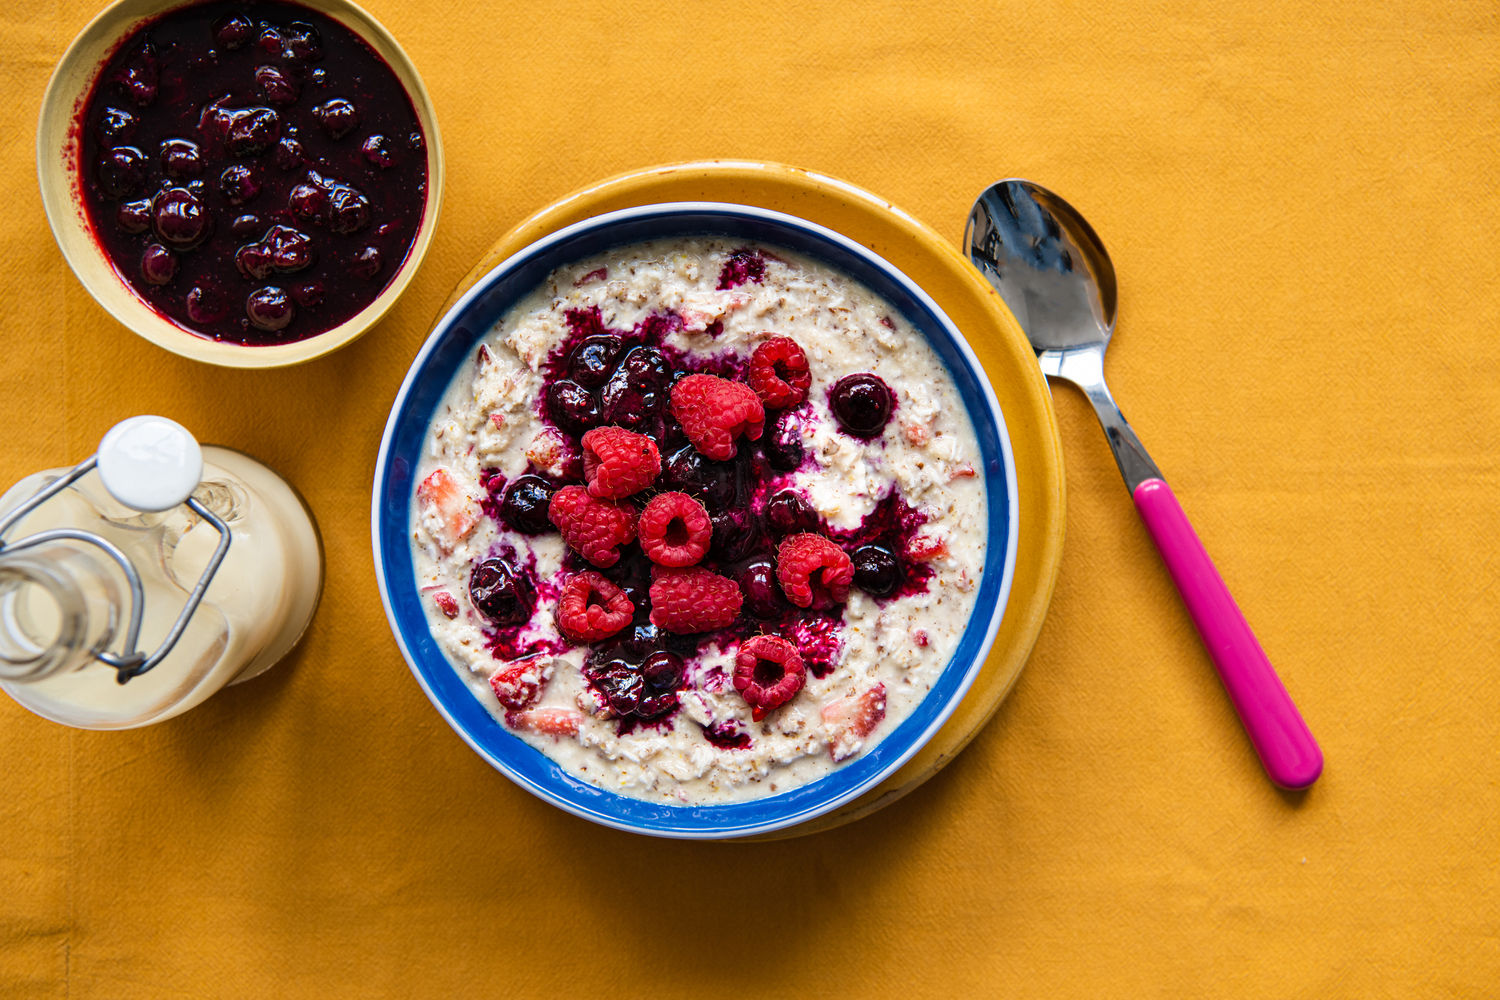 Grain Free Apple and Almond Bircher with Blueberry Compote